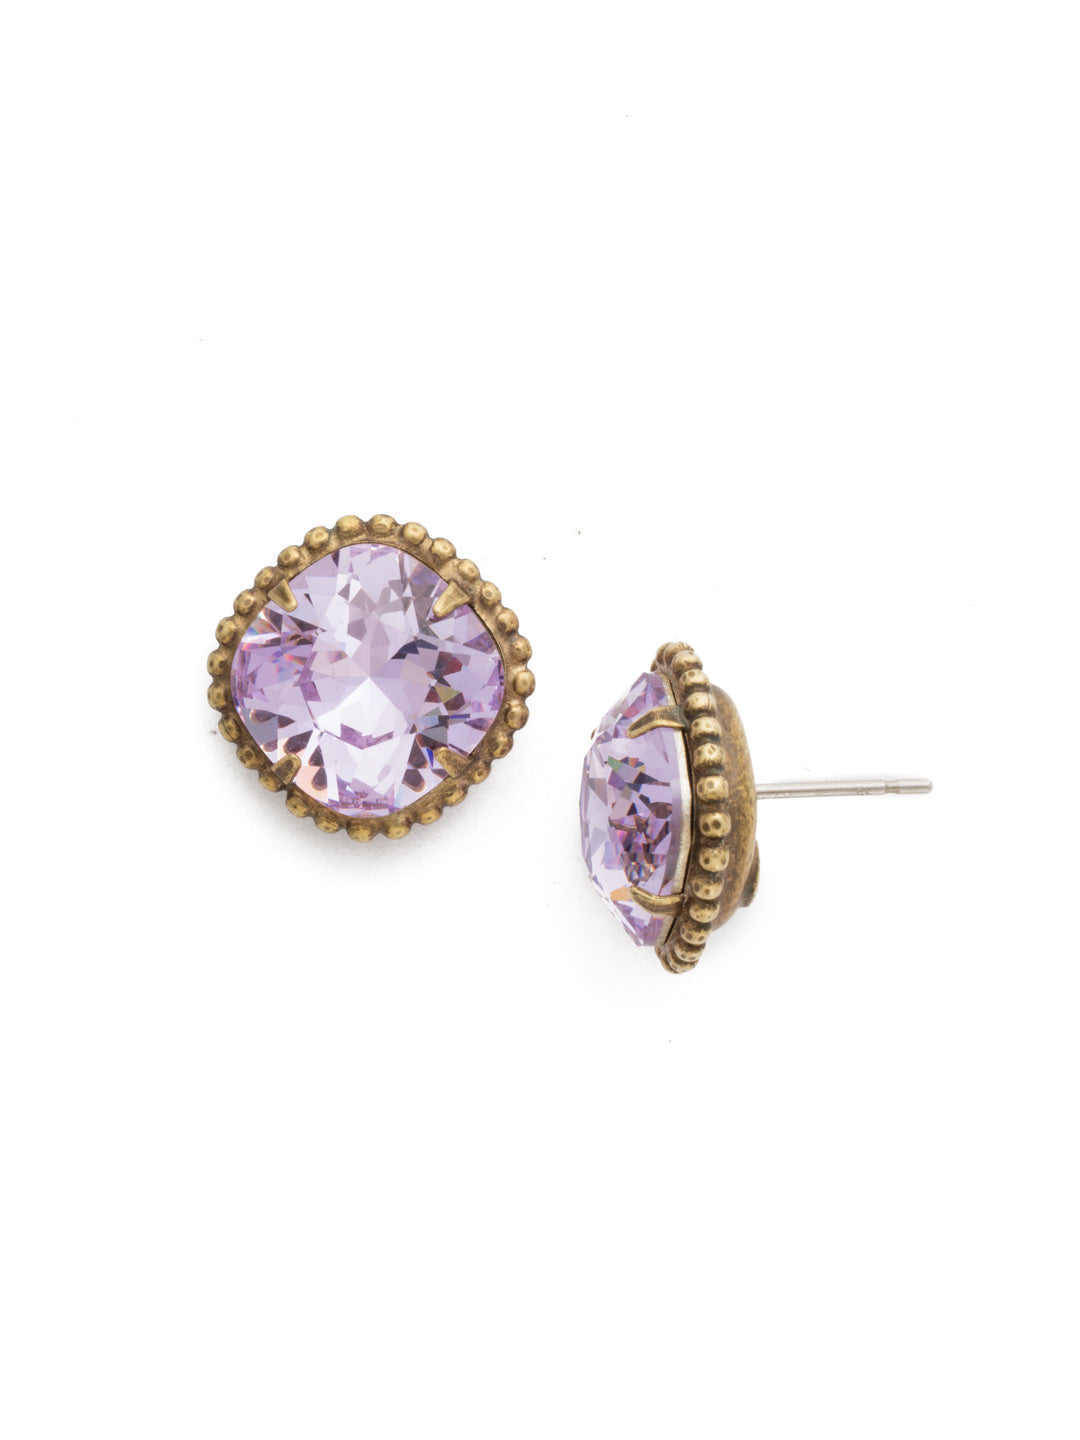 Cushion-Cut Solitaire Stud Earrings - EBX10AGVI - <p>All around allure; the Cushion-Cut Solitaire Stud Earring features a rounded-edge, cushion cut stone that is encircled by a vintage inspired decorative, edged border. A post backing ensures comfortable, everyday wear. From Sorrelli's Violet collection in our Antique Gold-tone finish.</p>